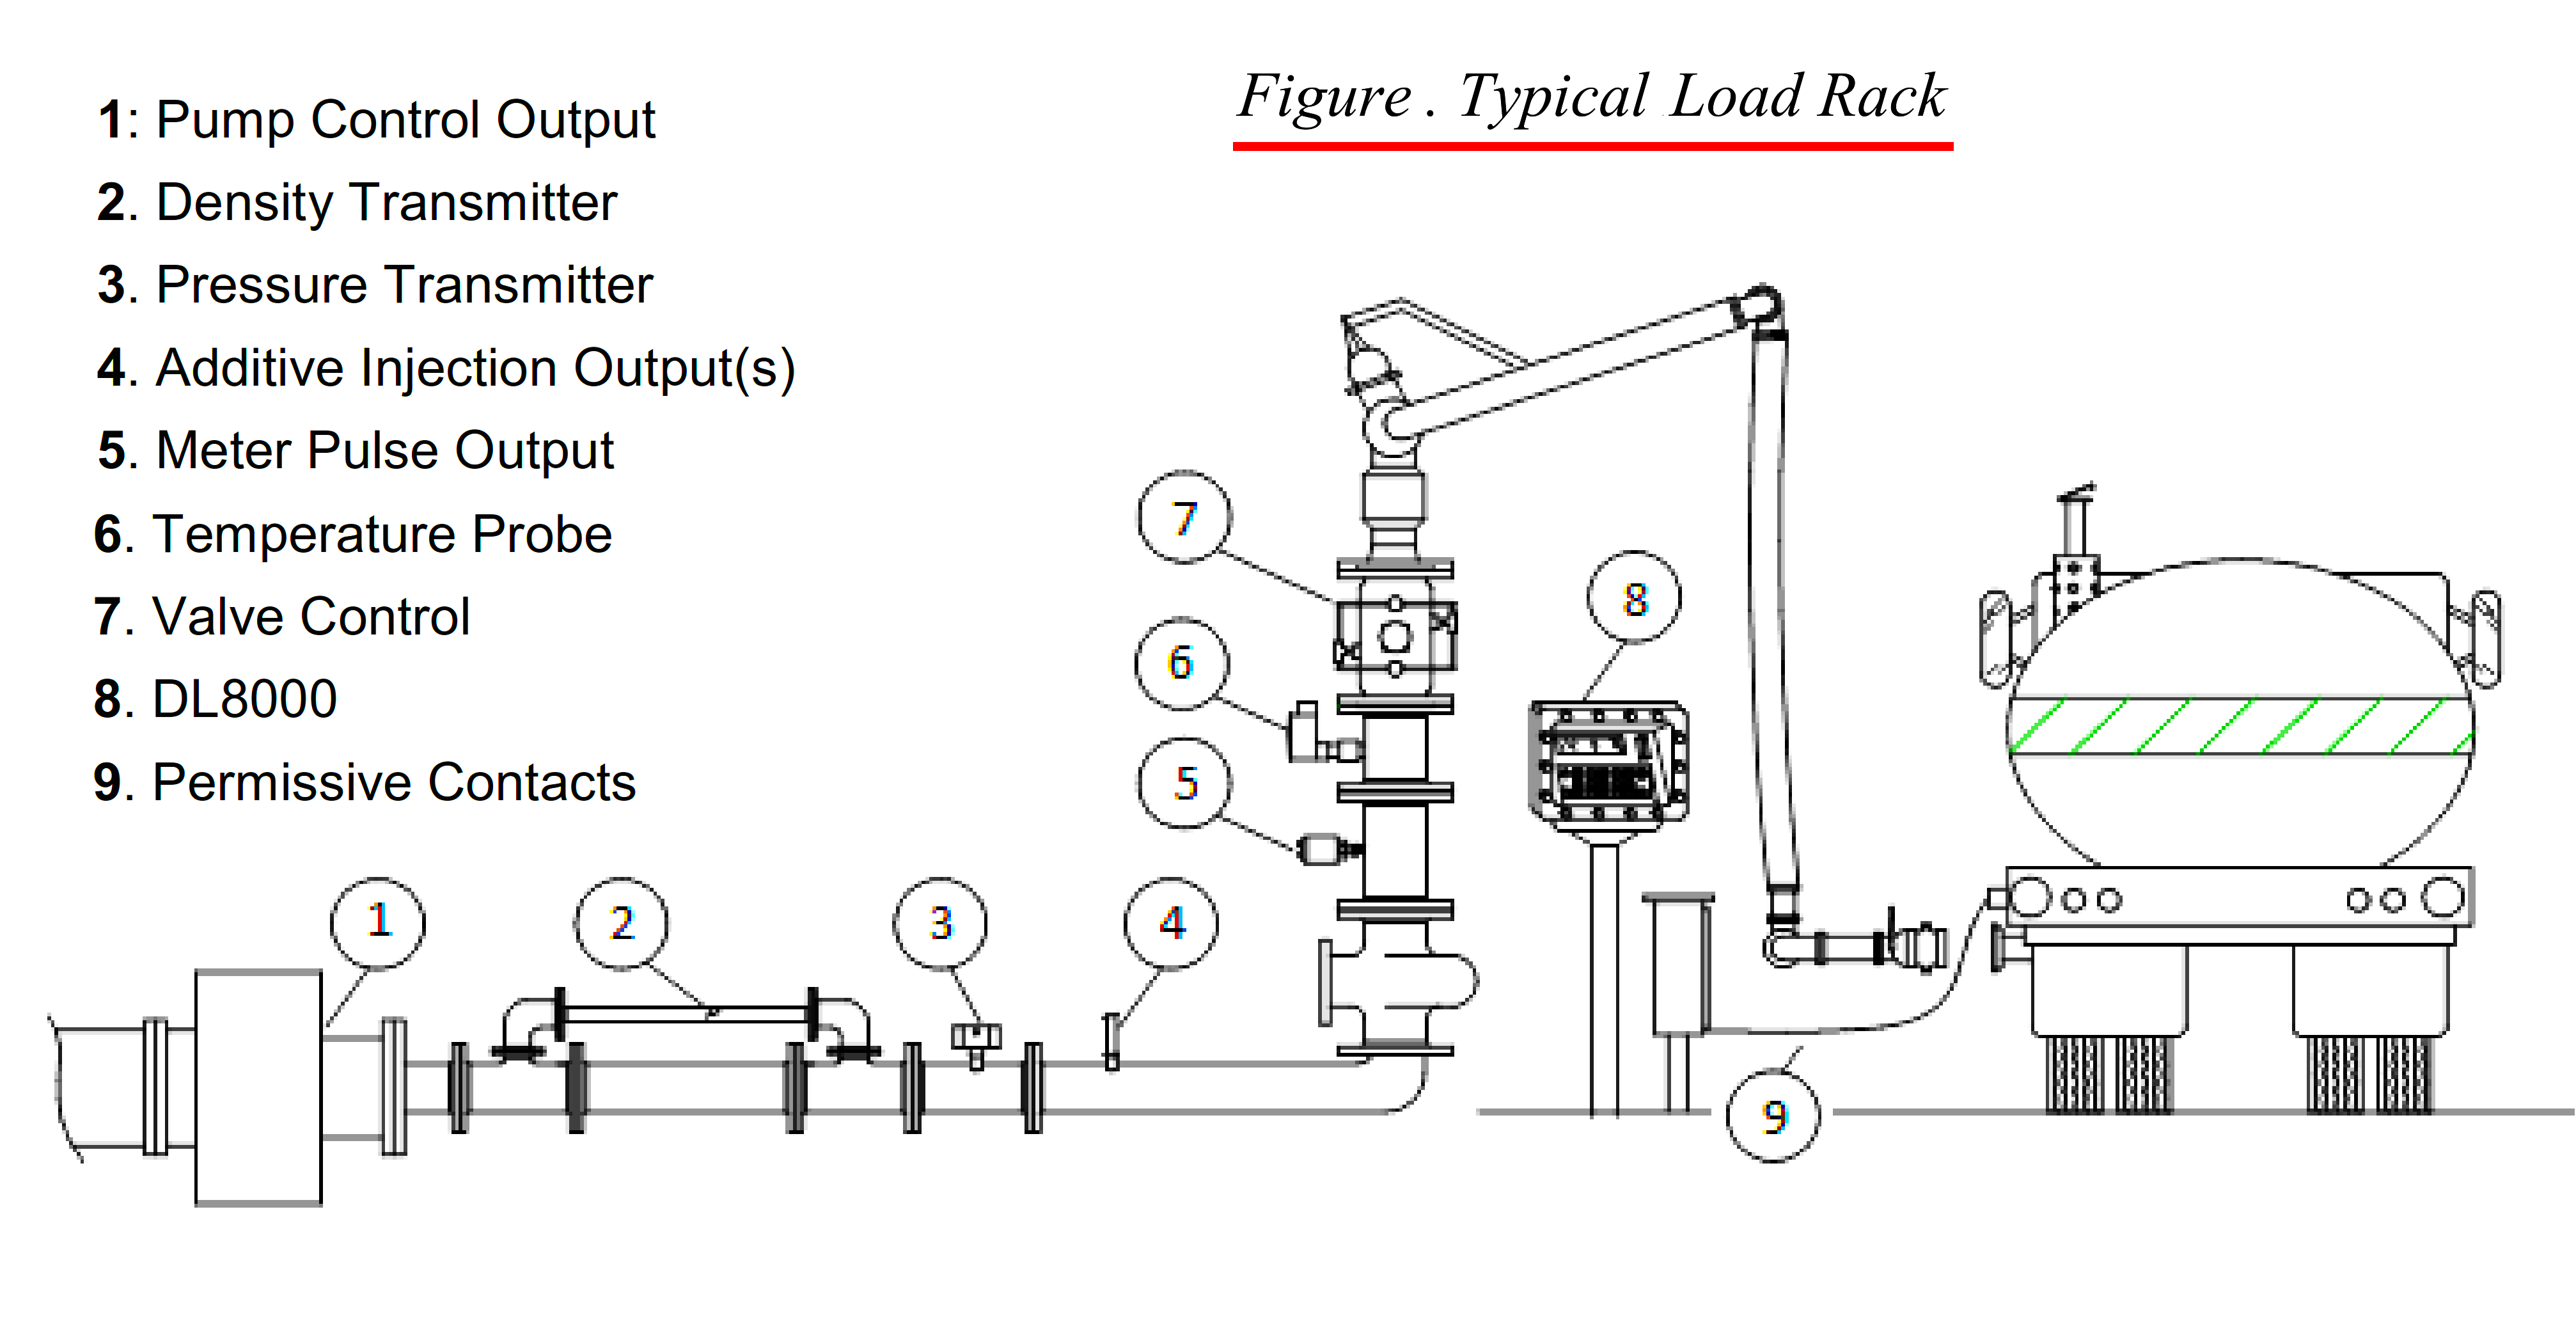 Typical Load Rack for Batch Process